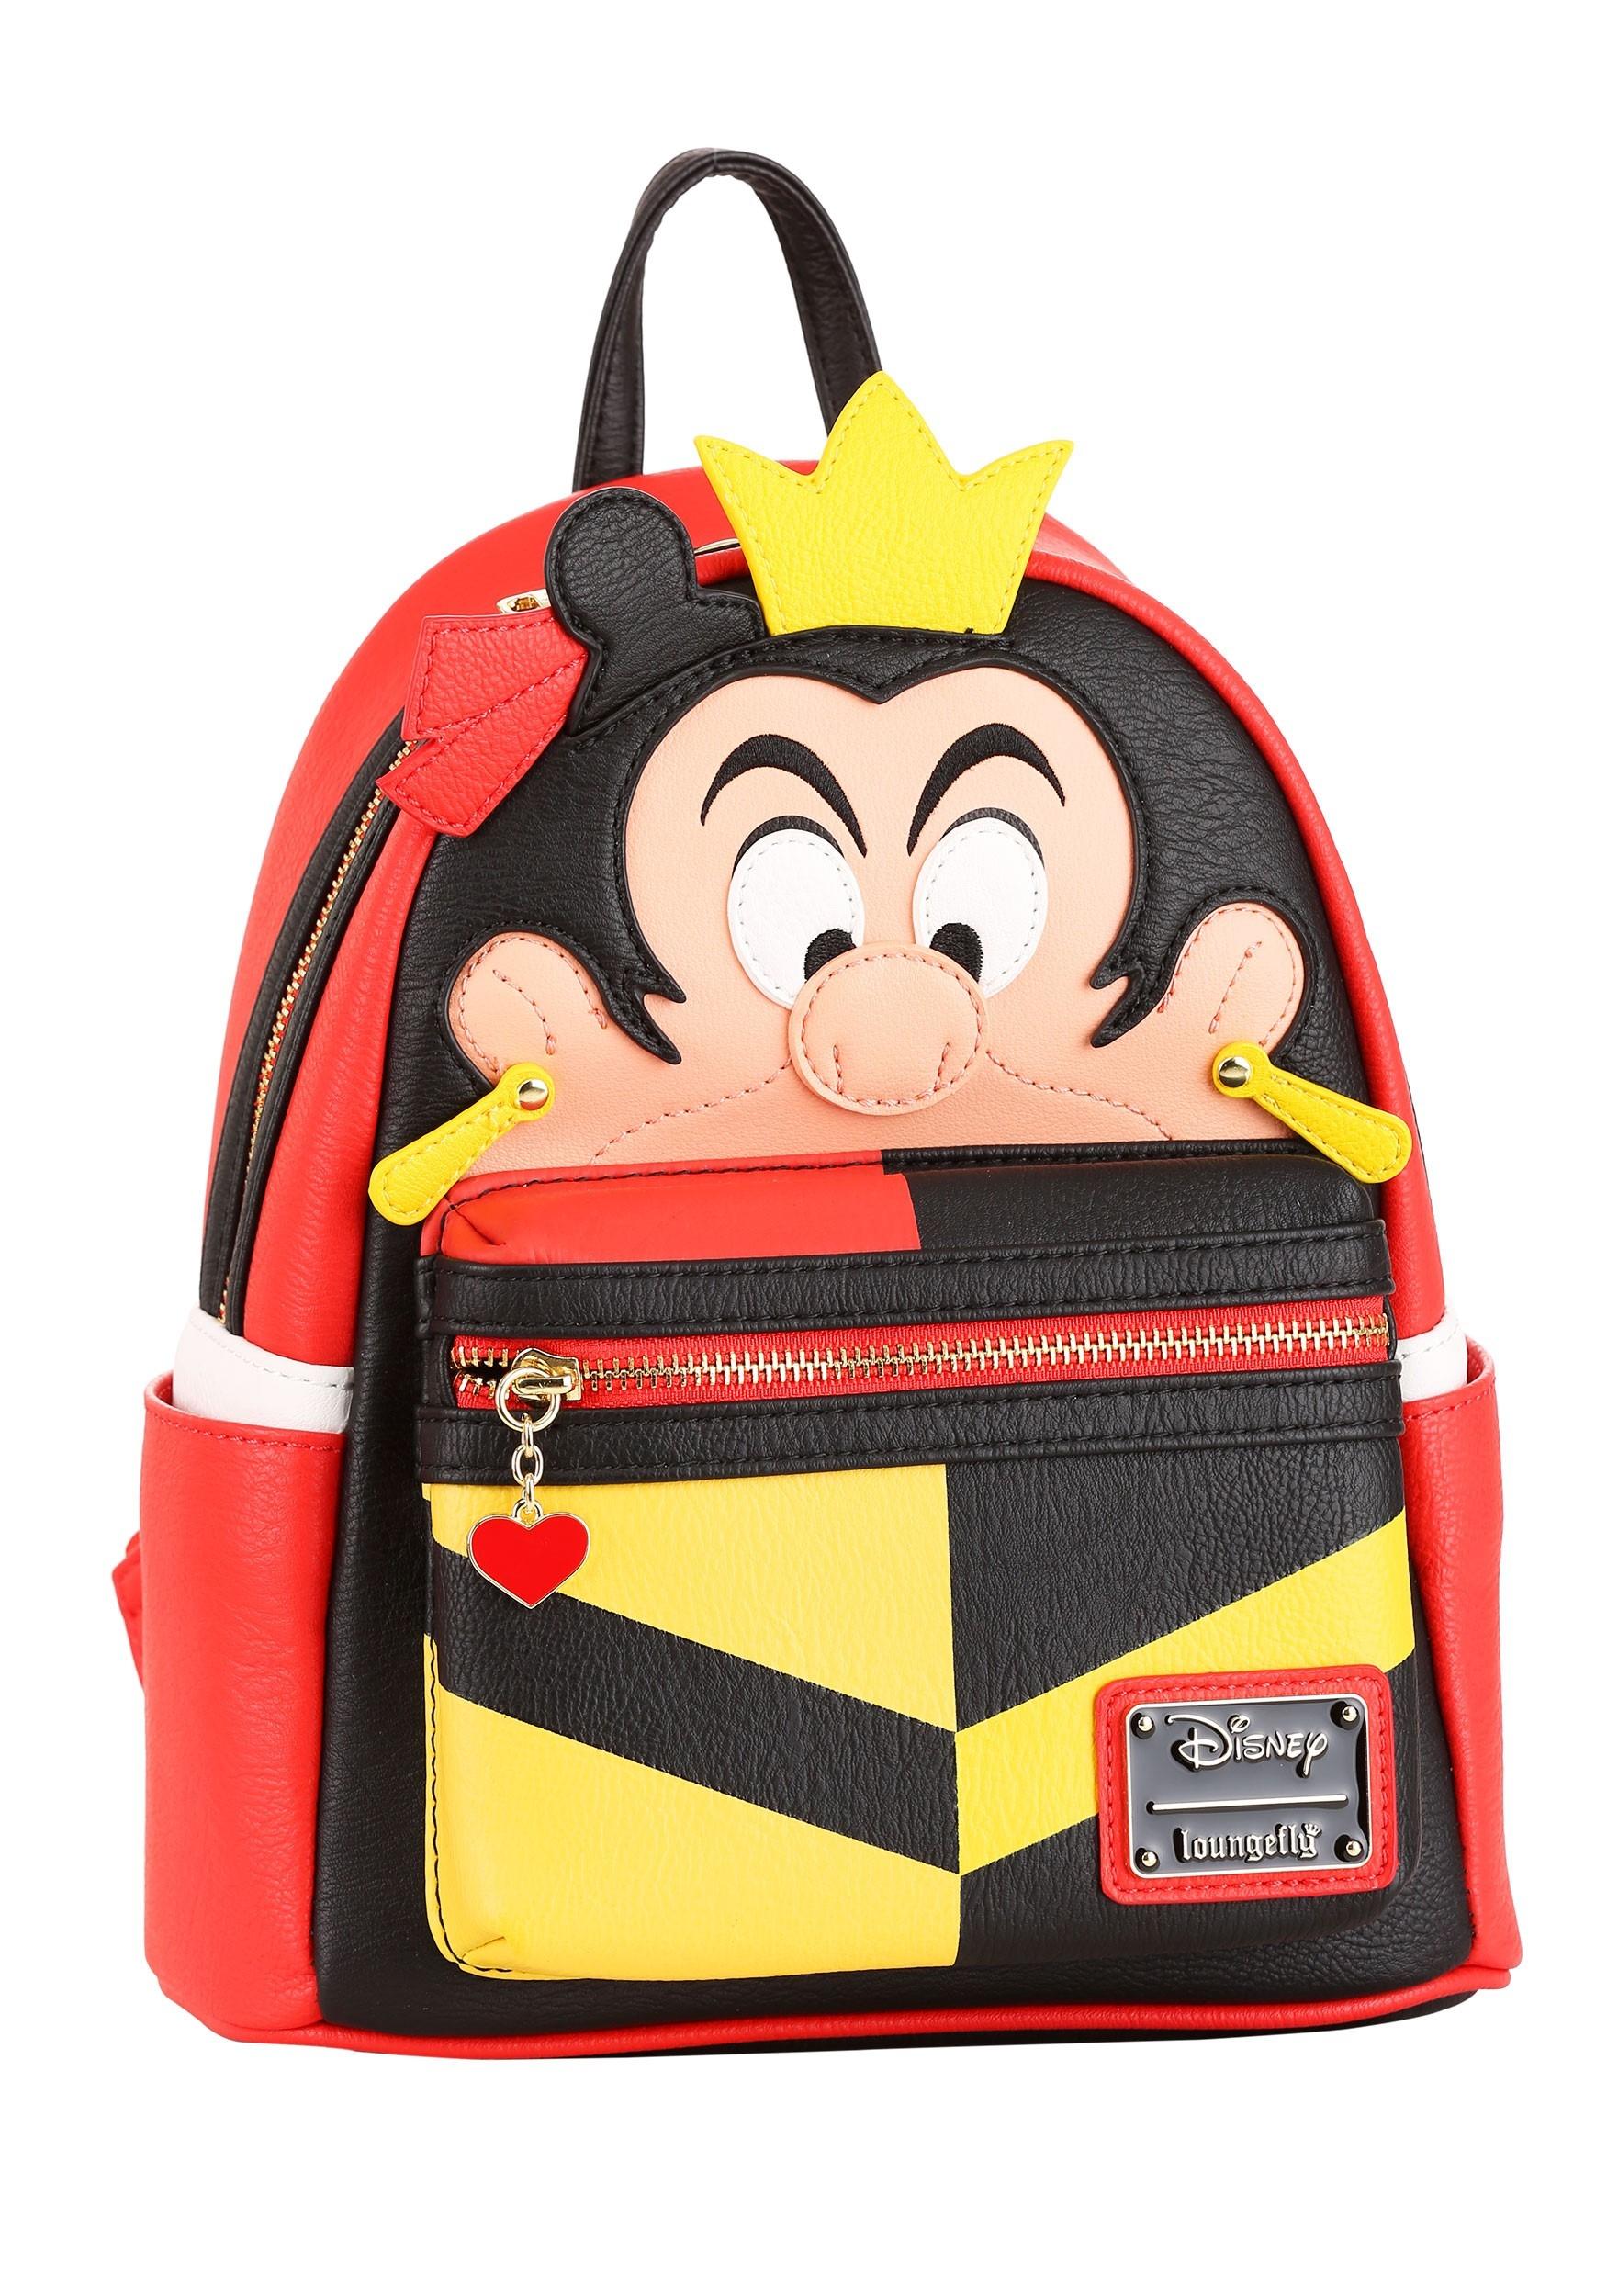 Loungefly Disney Queen Of Hearts Faux Leather Mini Backpack